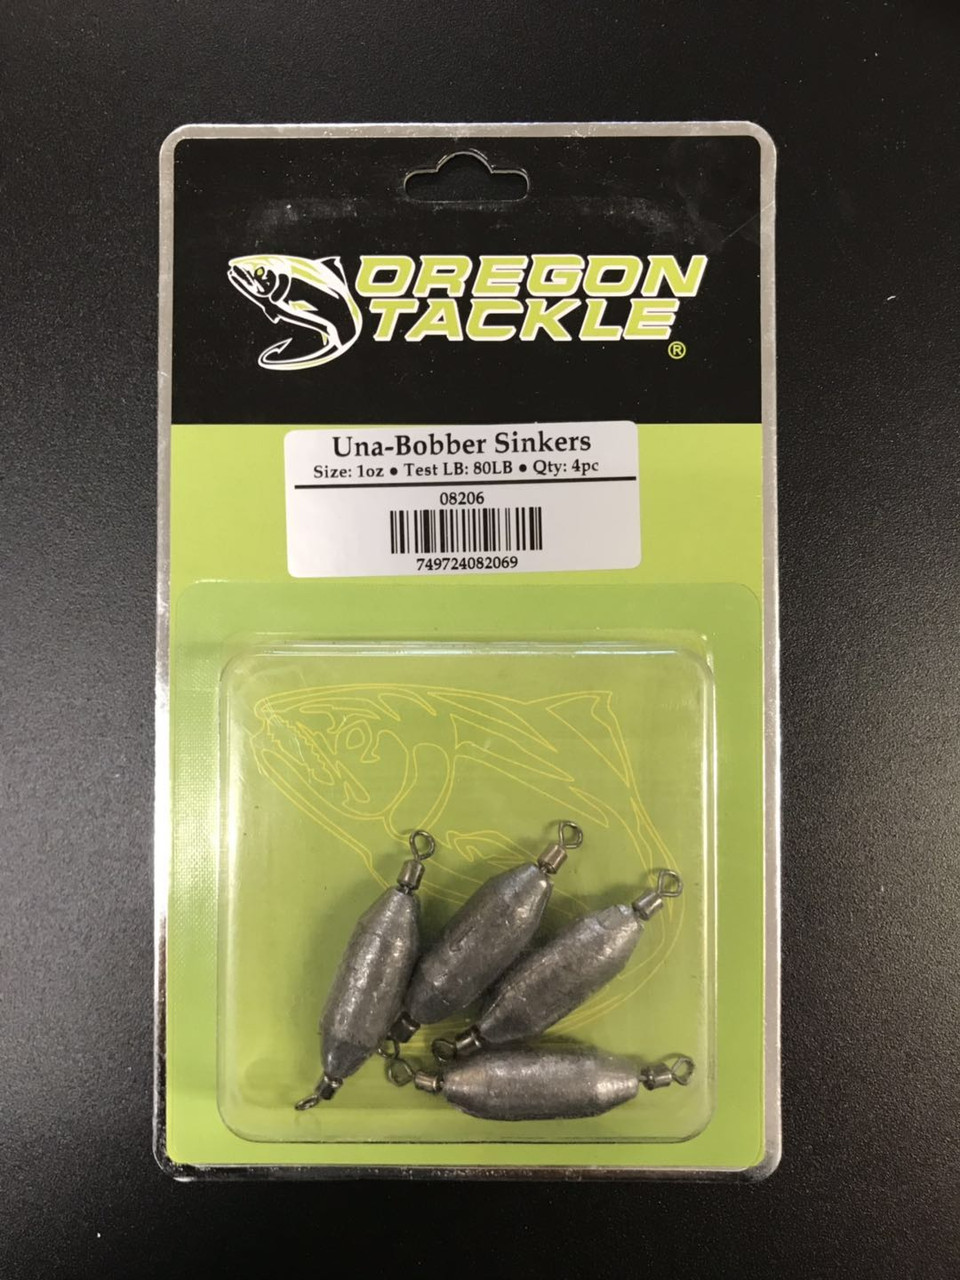 https://cdn11.bigcommerce.com/s-i6ykqoitnd/images/stencil/1280x1280/products/8887/61348/oregon-tackle-una-bobber-sinker-weights-sinkers-oregon-tackle-10oz-739450__51496.1643936637.jpg?c=1&imbypass=on